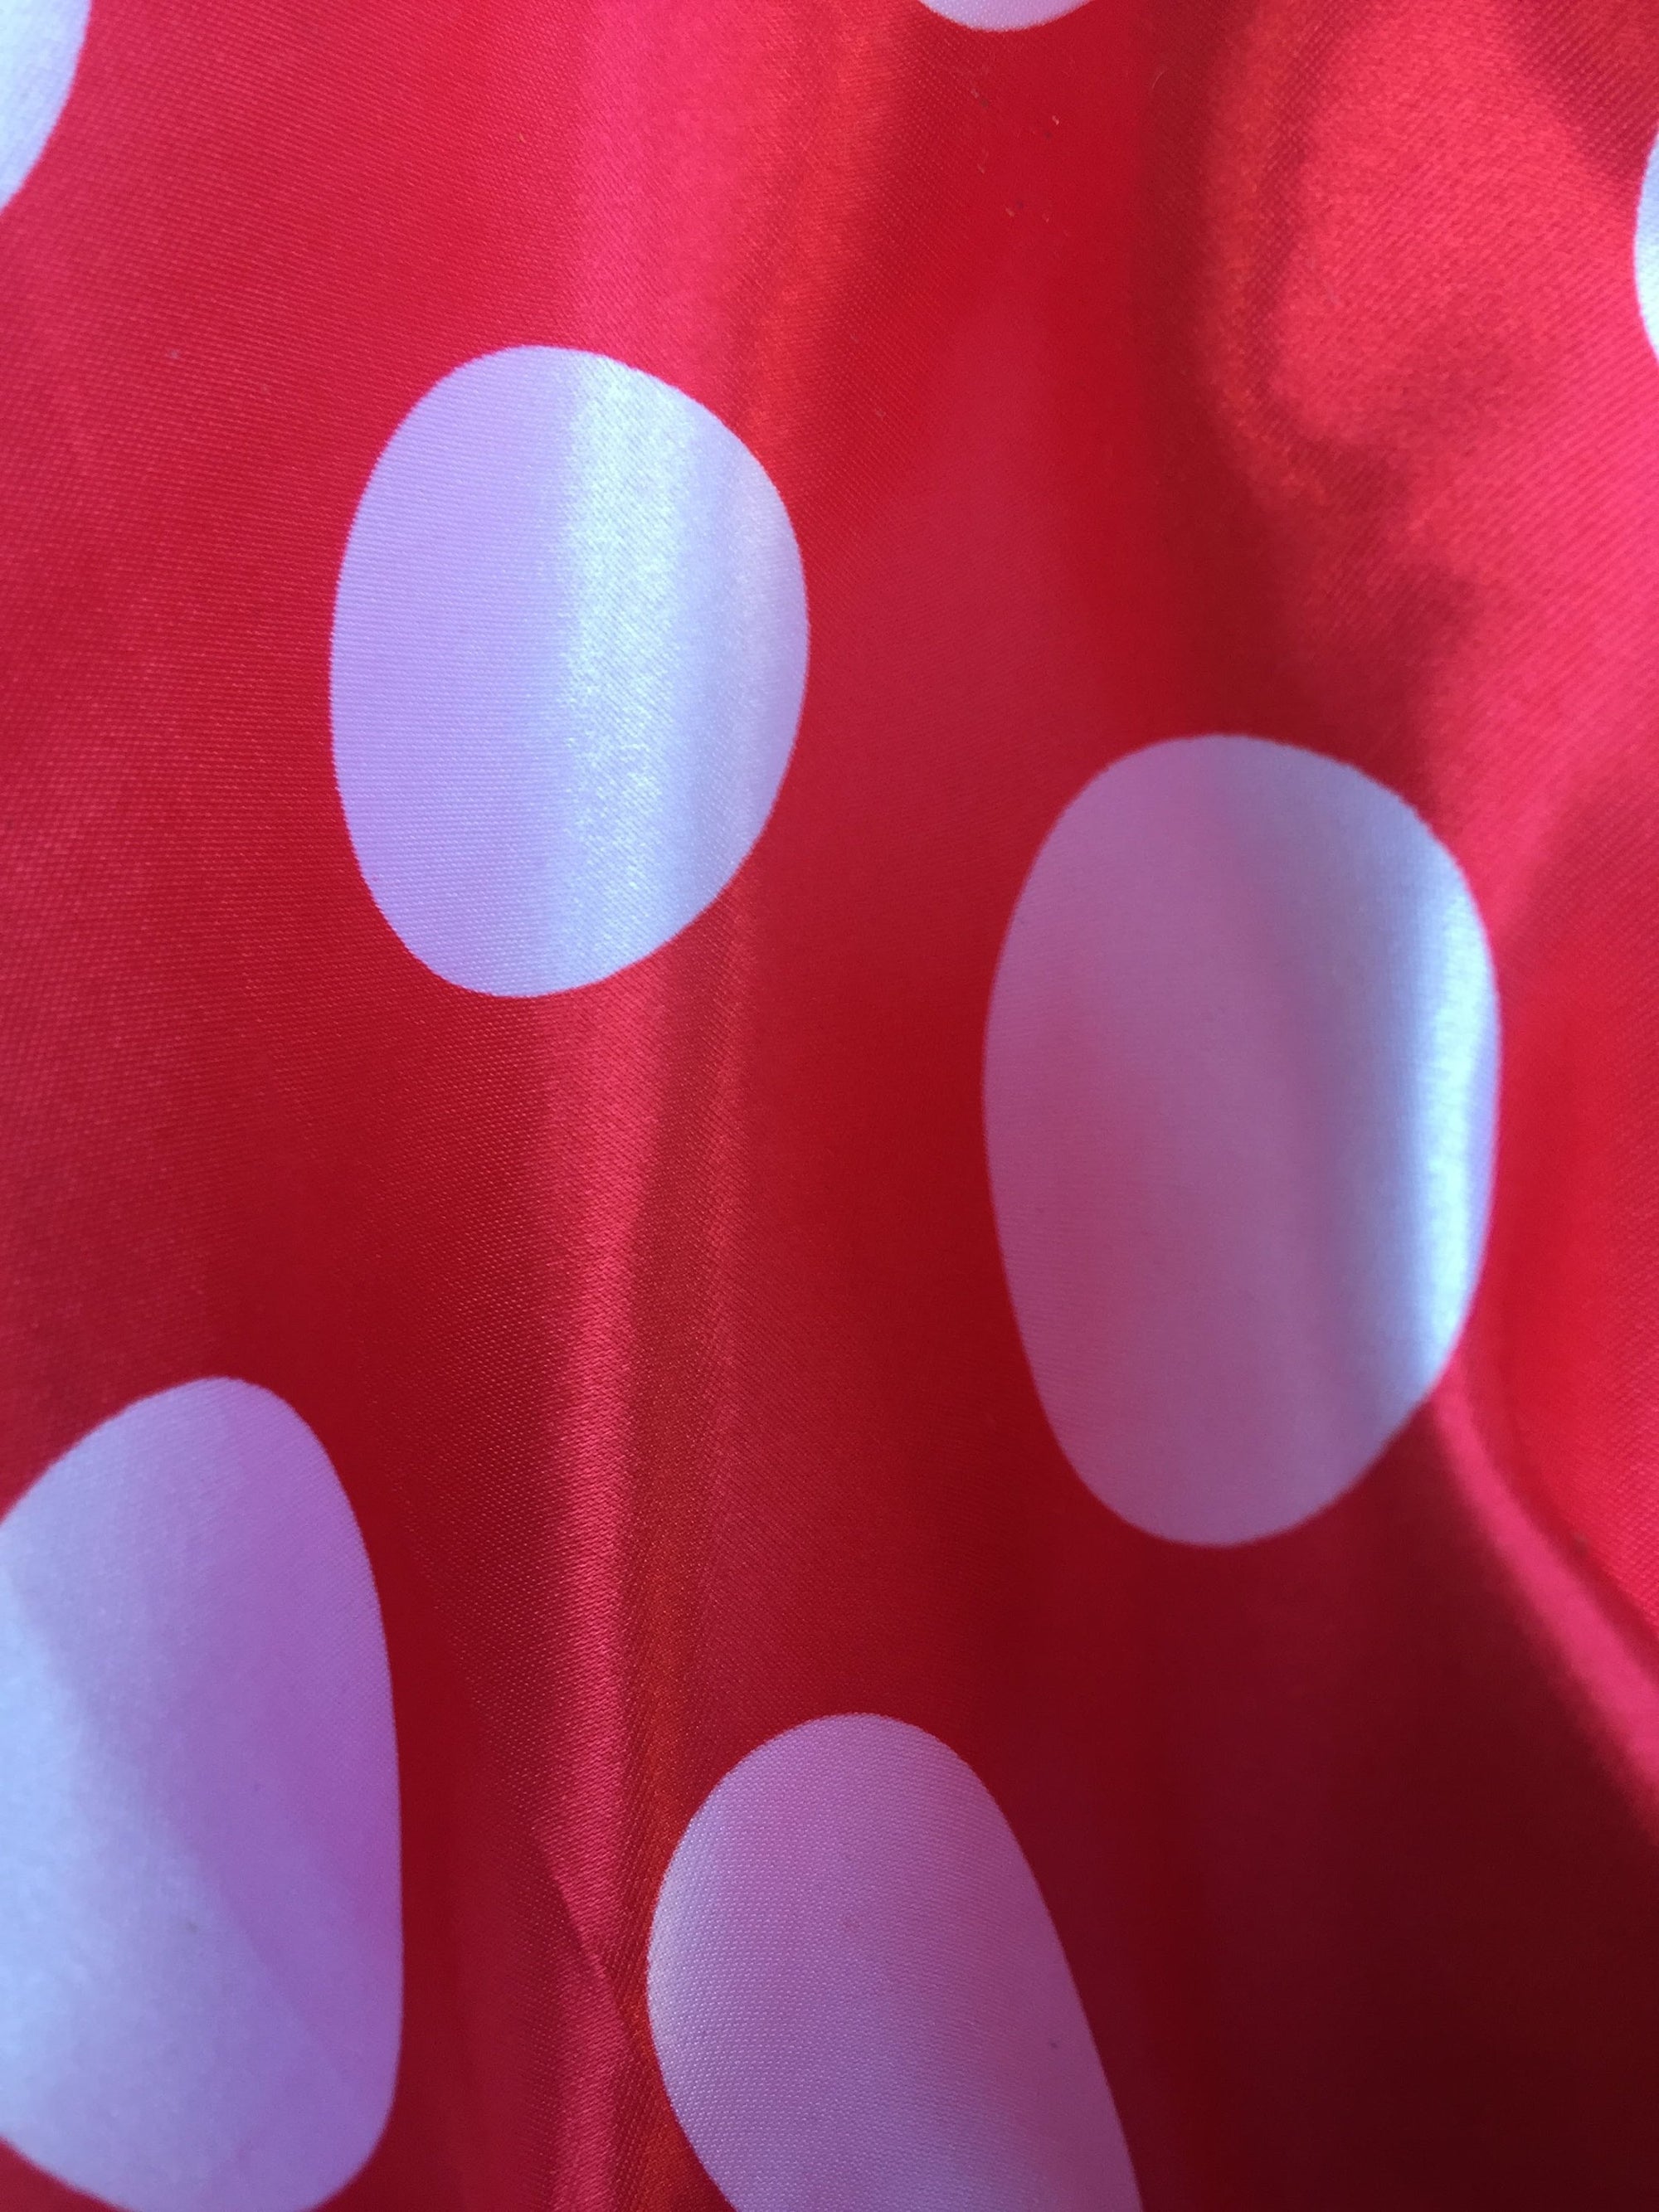 Lana 1.25" WHITE Polka Dots on RED Polyester Light Weight Satin Fabric by the Yard - 10071